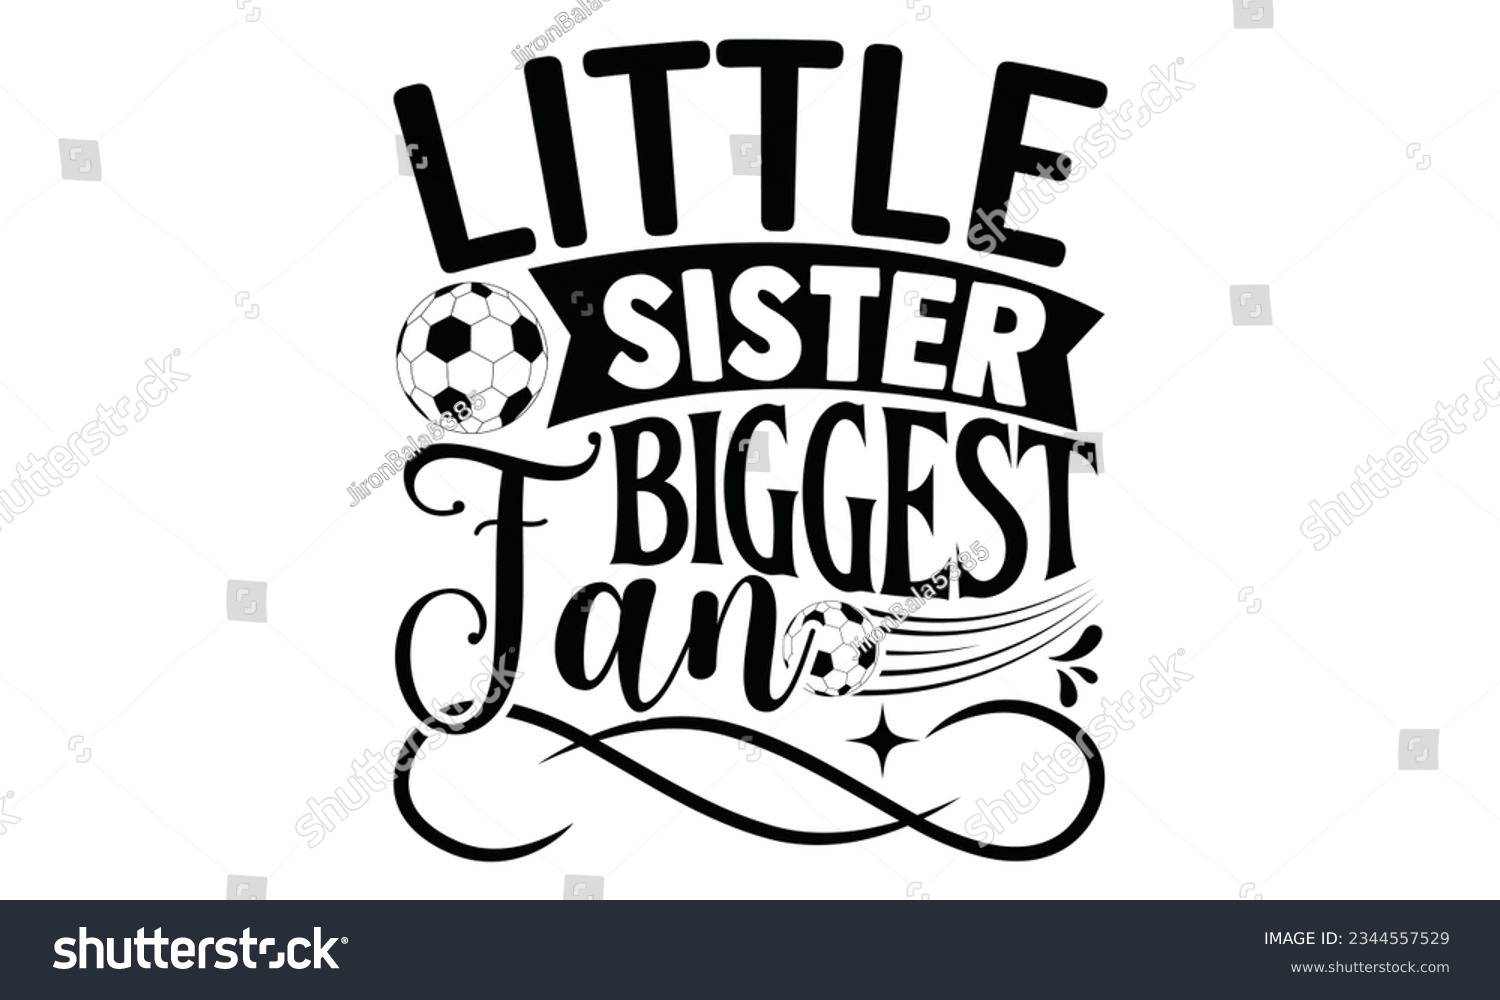 SVG of Little Sister Biggest Fan - Soccer SVG Design, This illustration can be used as a print on t-shirts, bags and mug stationary or as a poster. svg